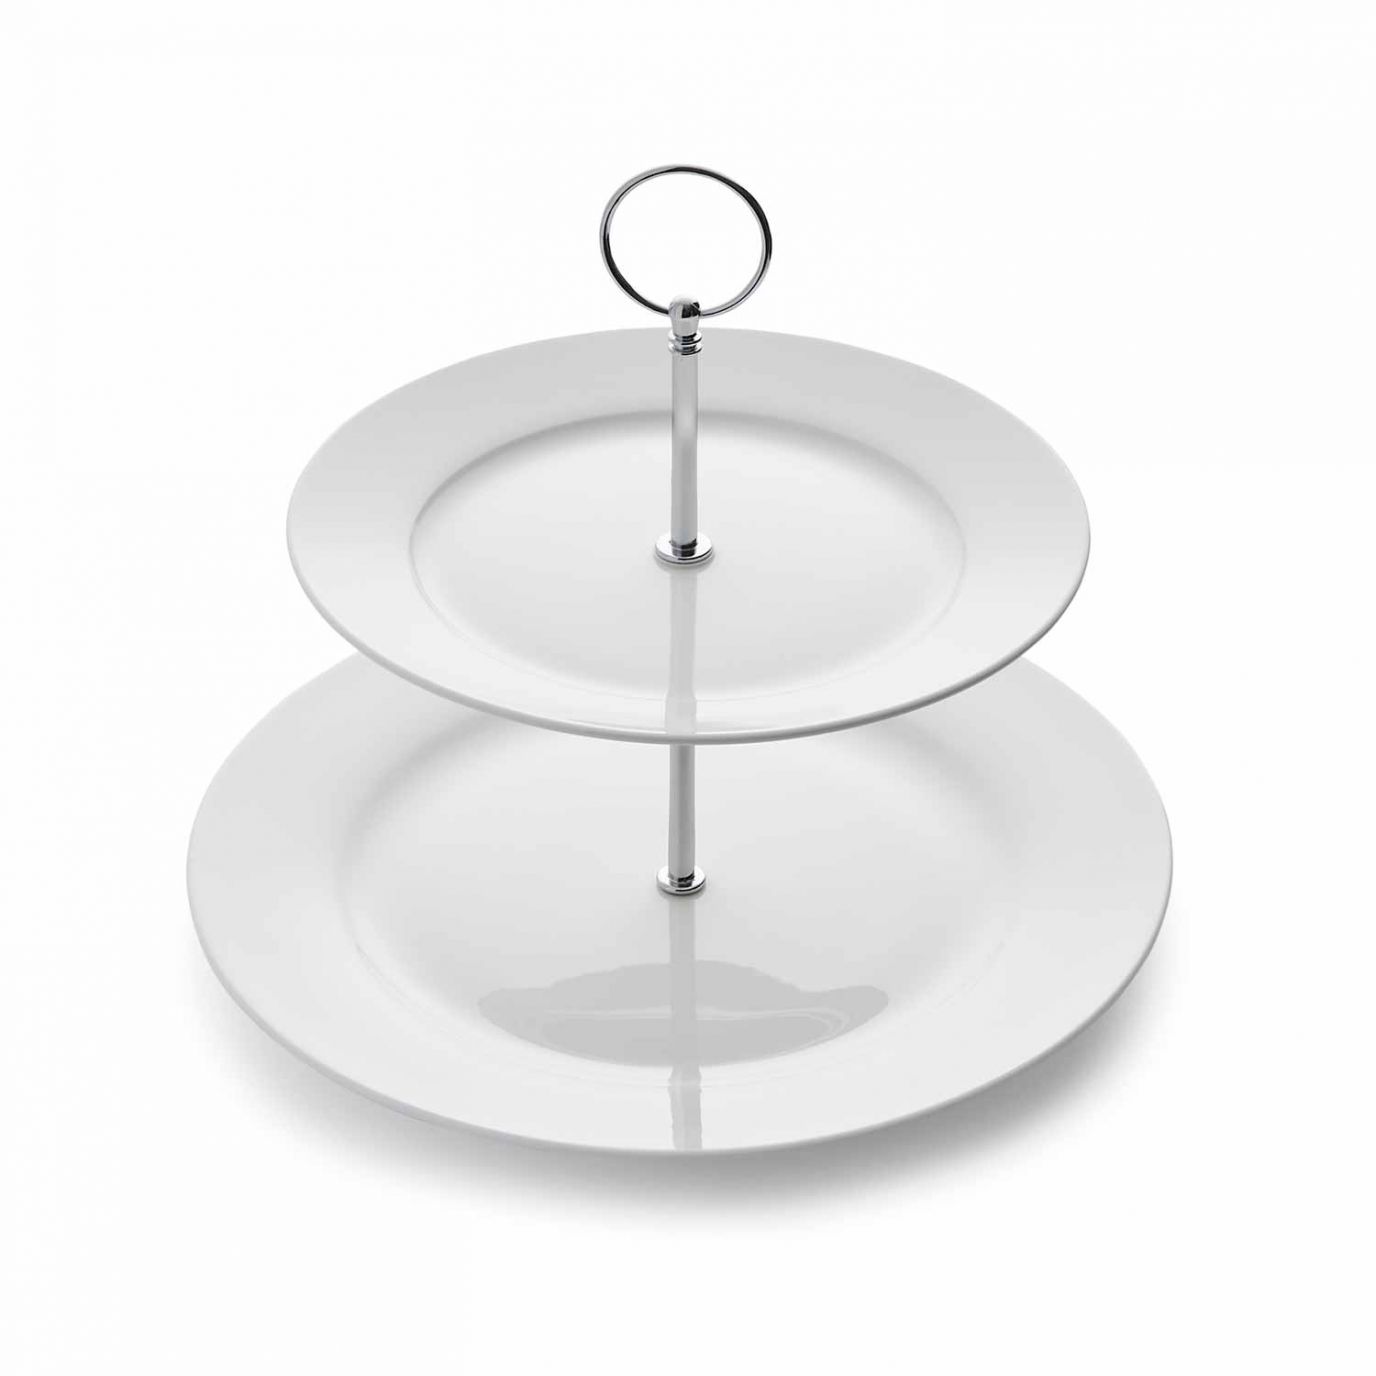 Serendipity 2-Tier Cake Stand